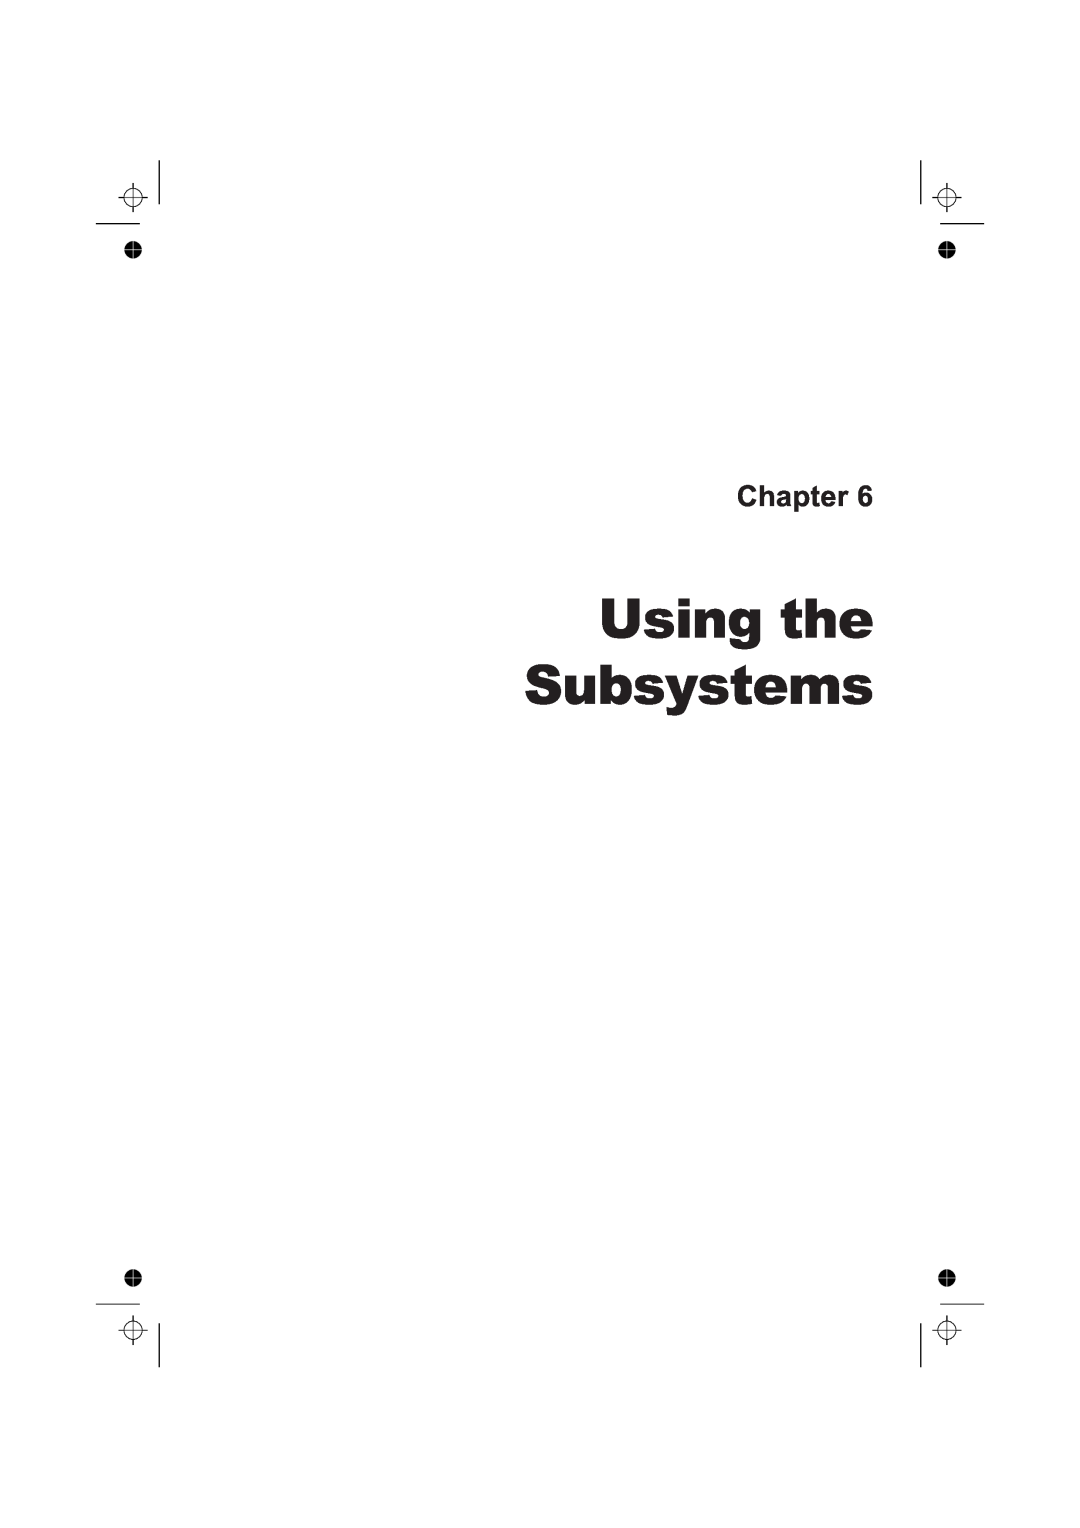 Fluke PM6681R, PM6685R manual Using the Subsystems, Chapter 